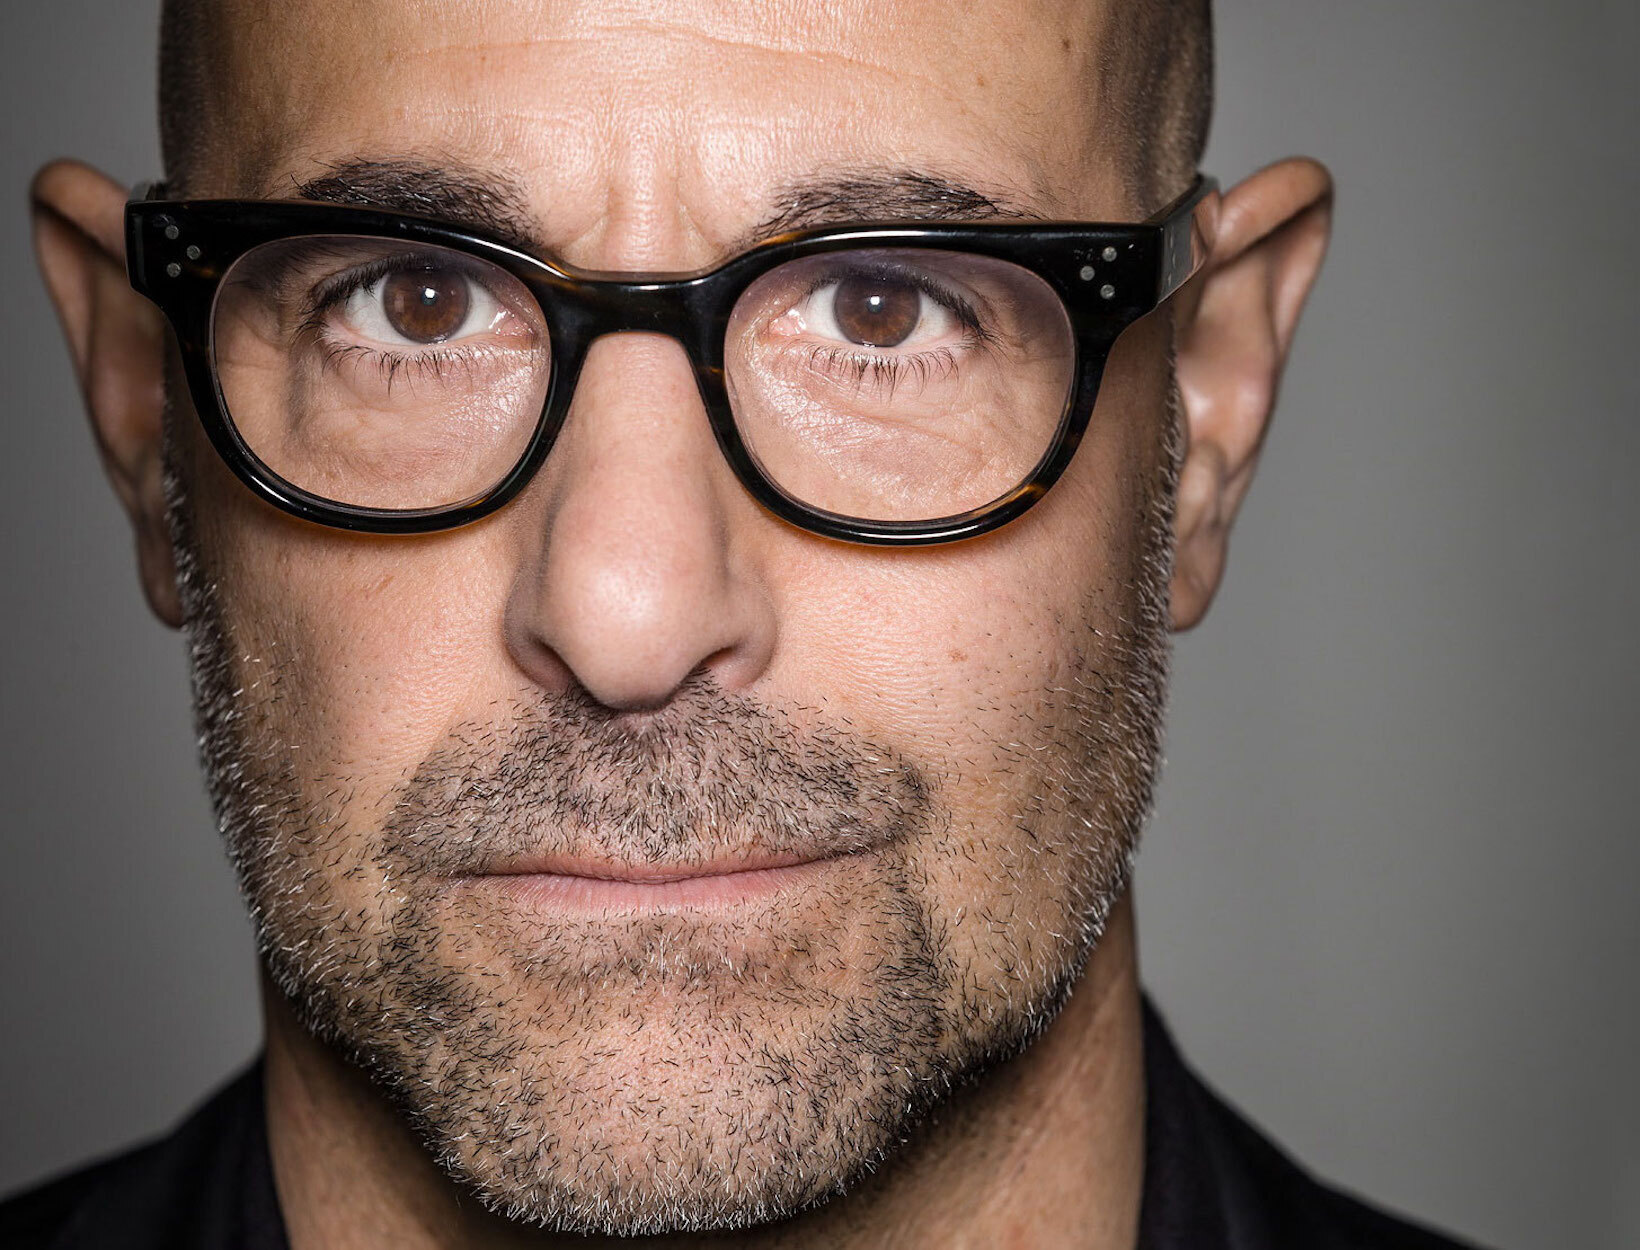 Gwyneth Paltrow x Stanley Tucci: For the Love of Food | goop